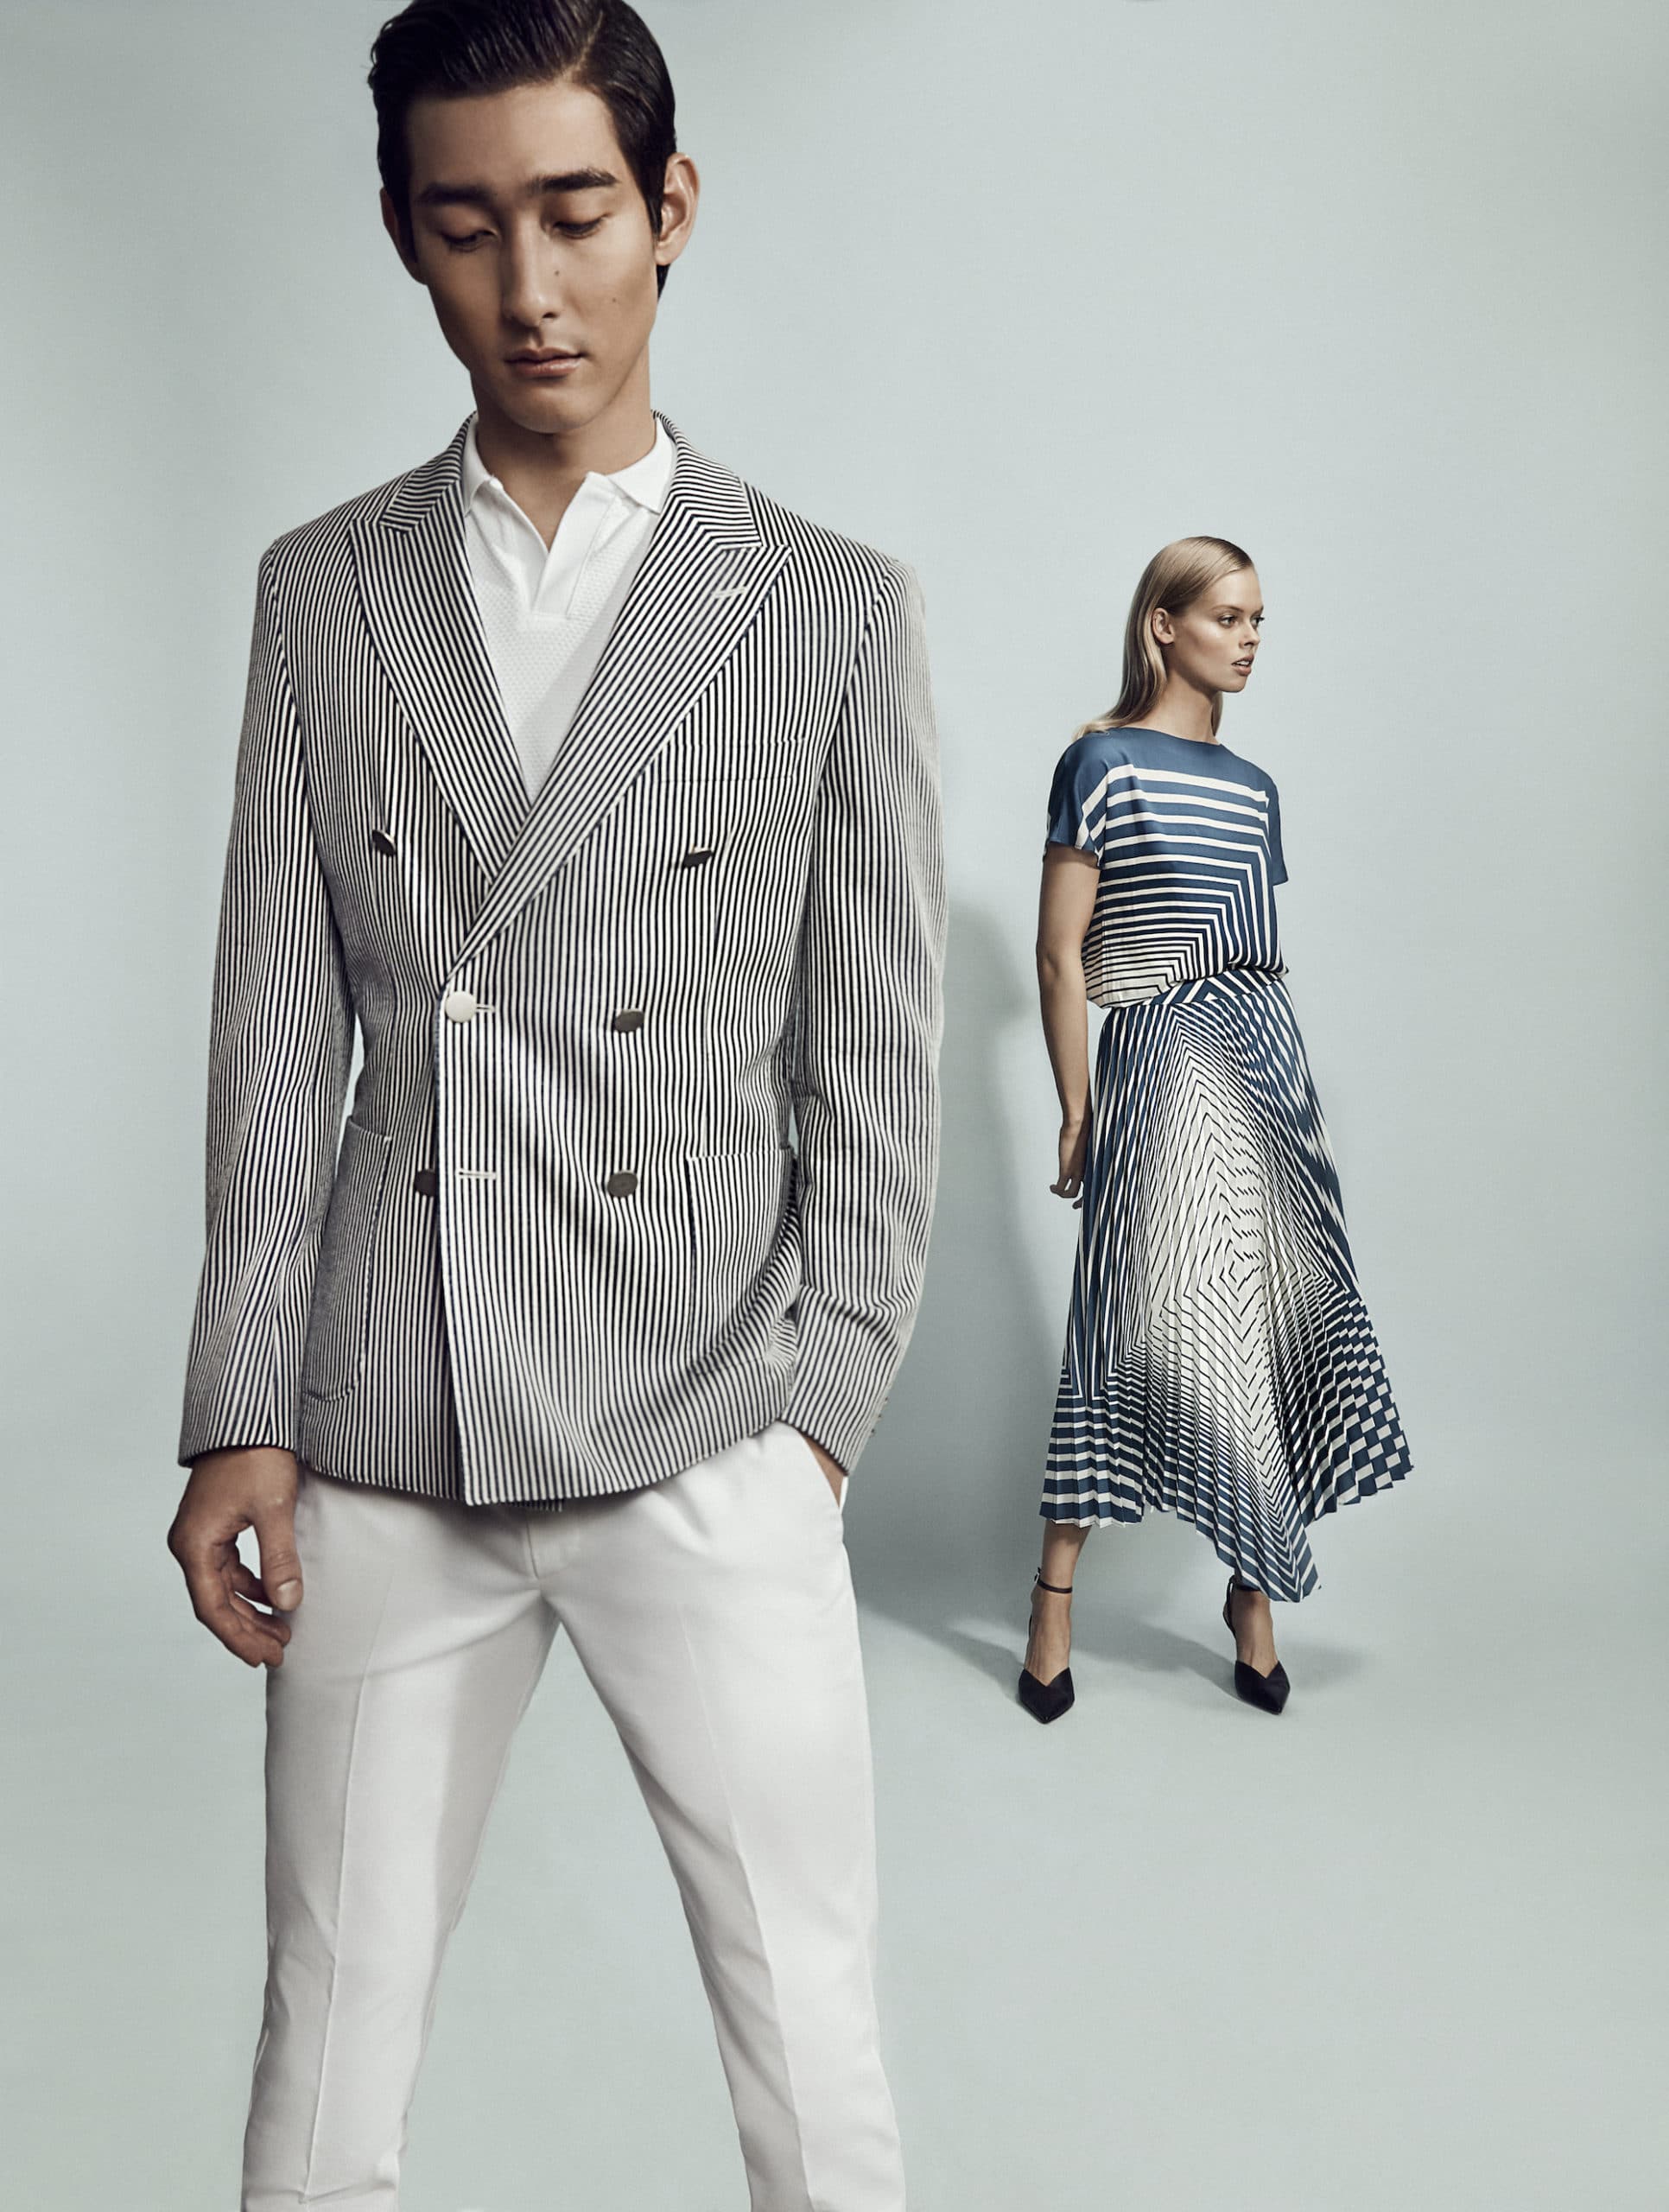 The Hugo Boss Spring 2020 Collection Gives Us A Reason To Celebrate